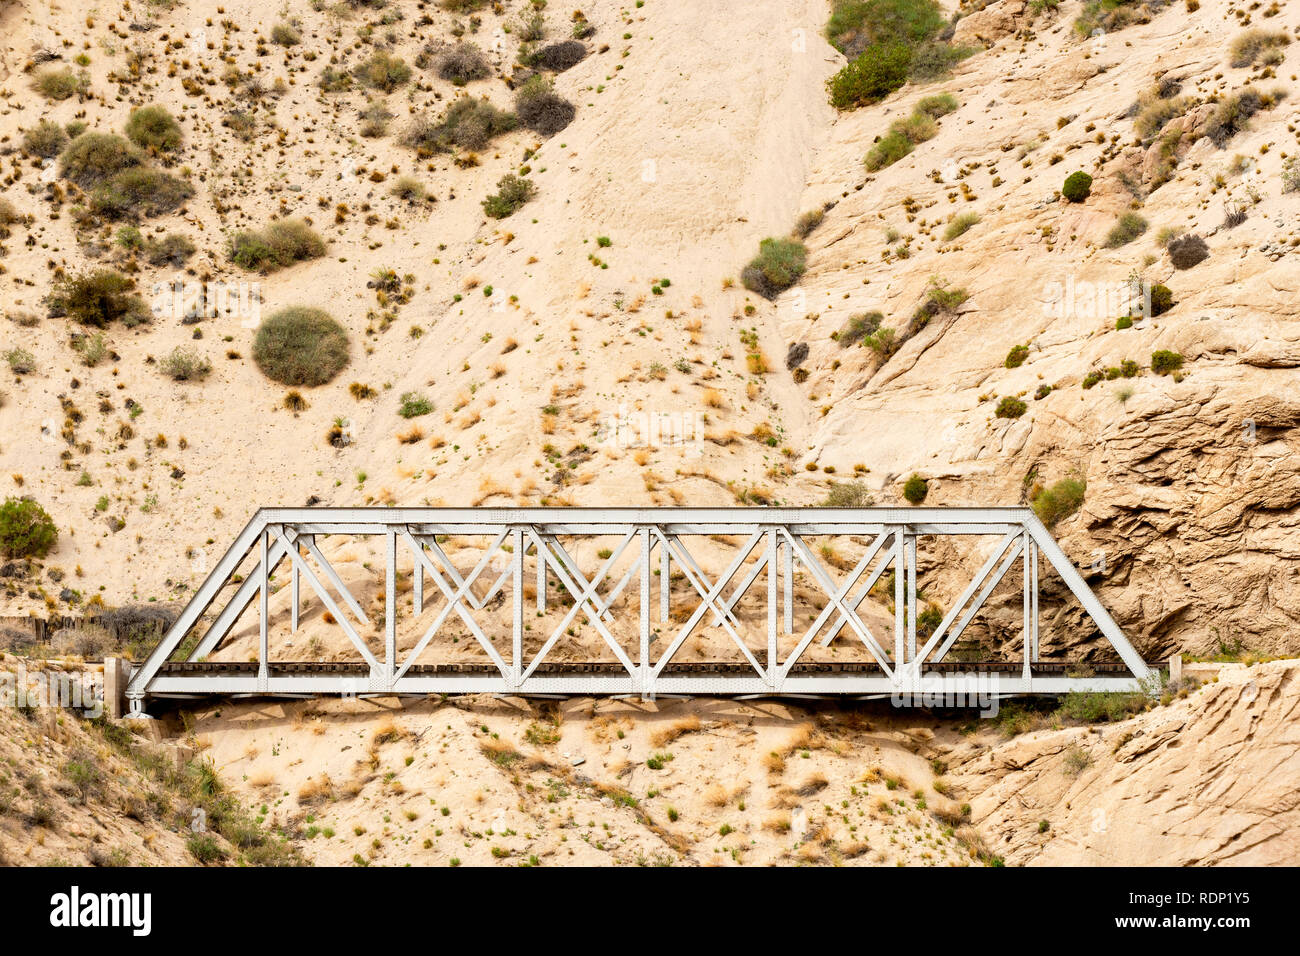 A bridge on the disused Transandine railway is being swallowed up by sand and gravel being eroded from the hillside. This section is in Argentina. Stock Photo